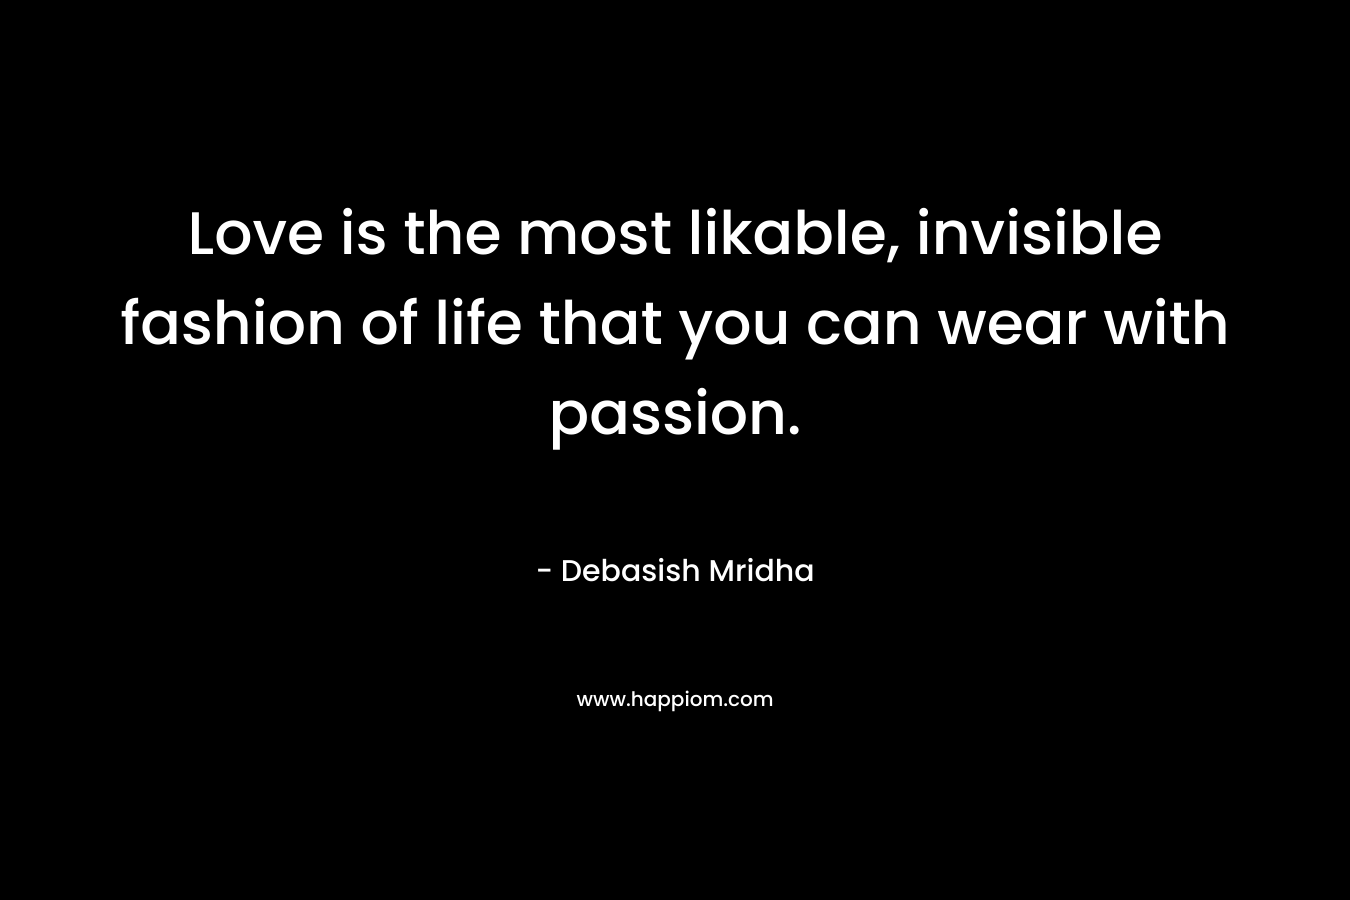 Love is the most likable, invisible fashion of life that you can wear with passion.